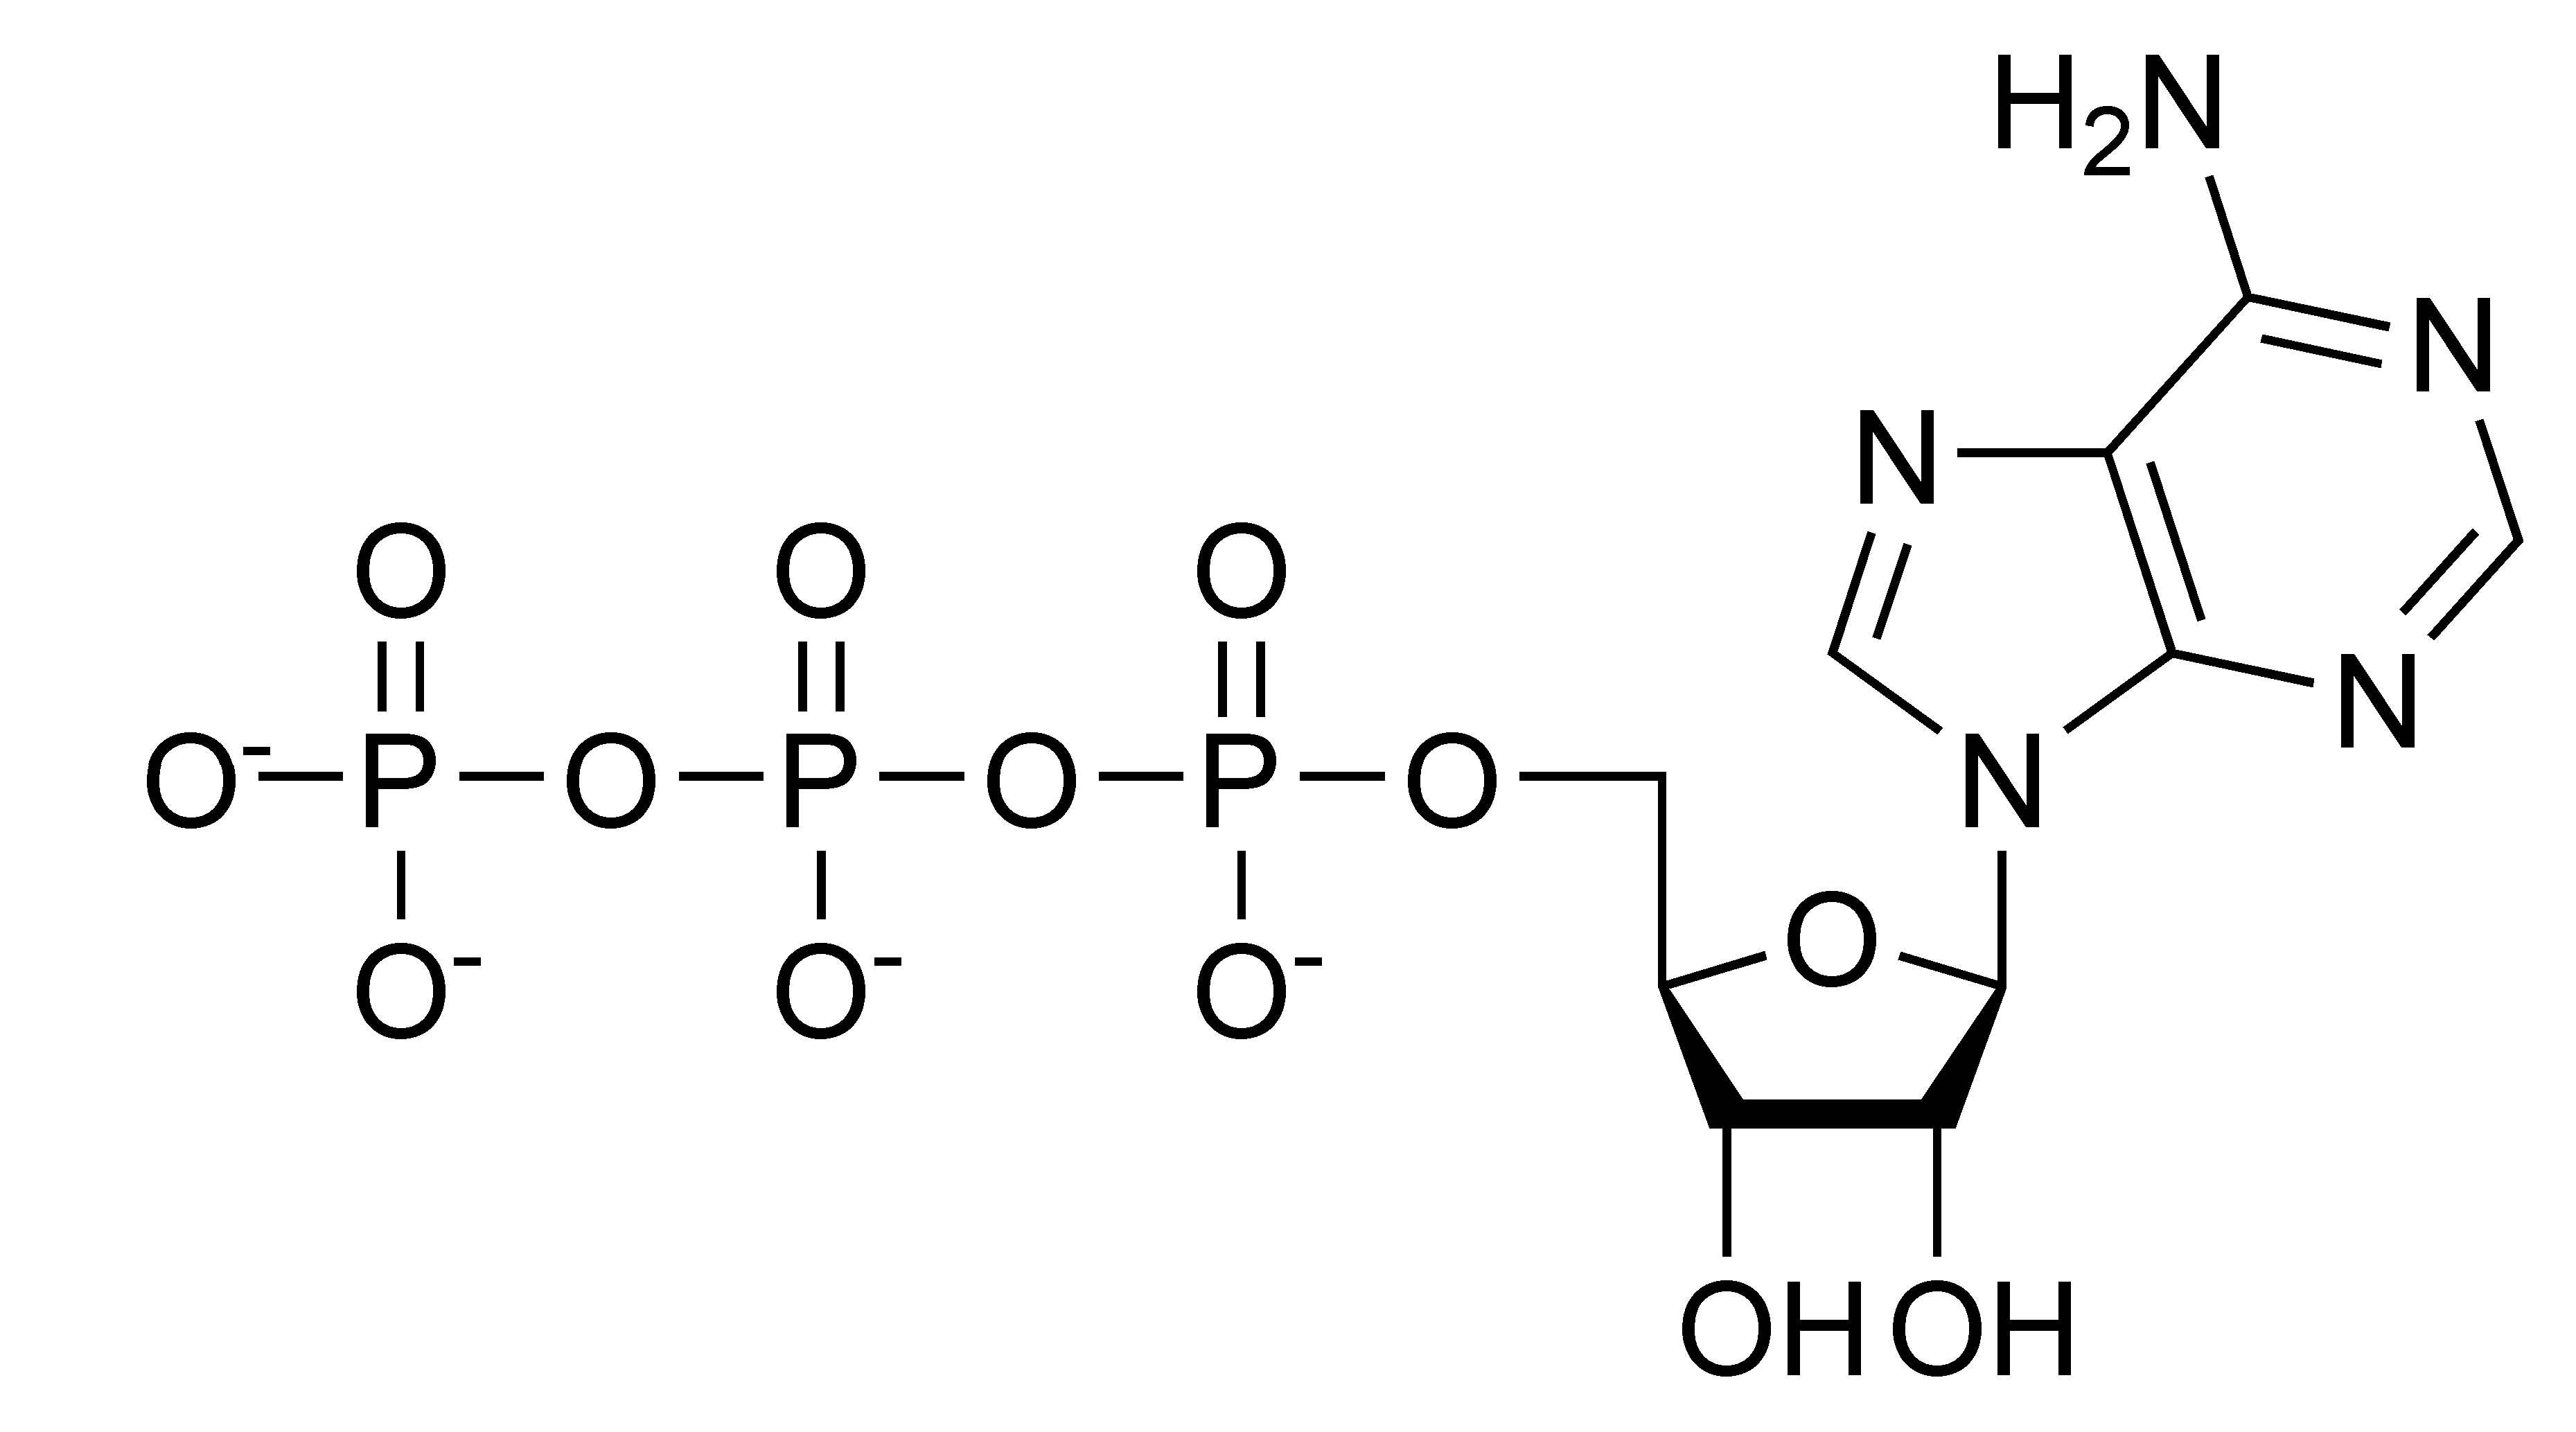 FileATP chemical structure.png Wikipedia